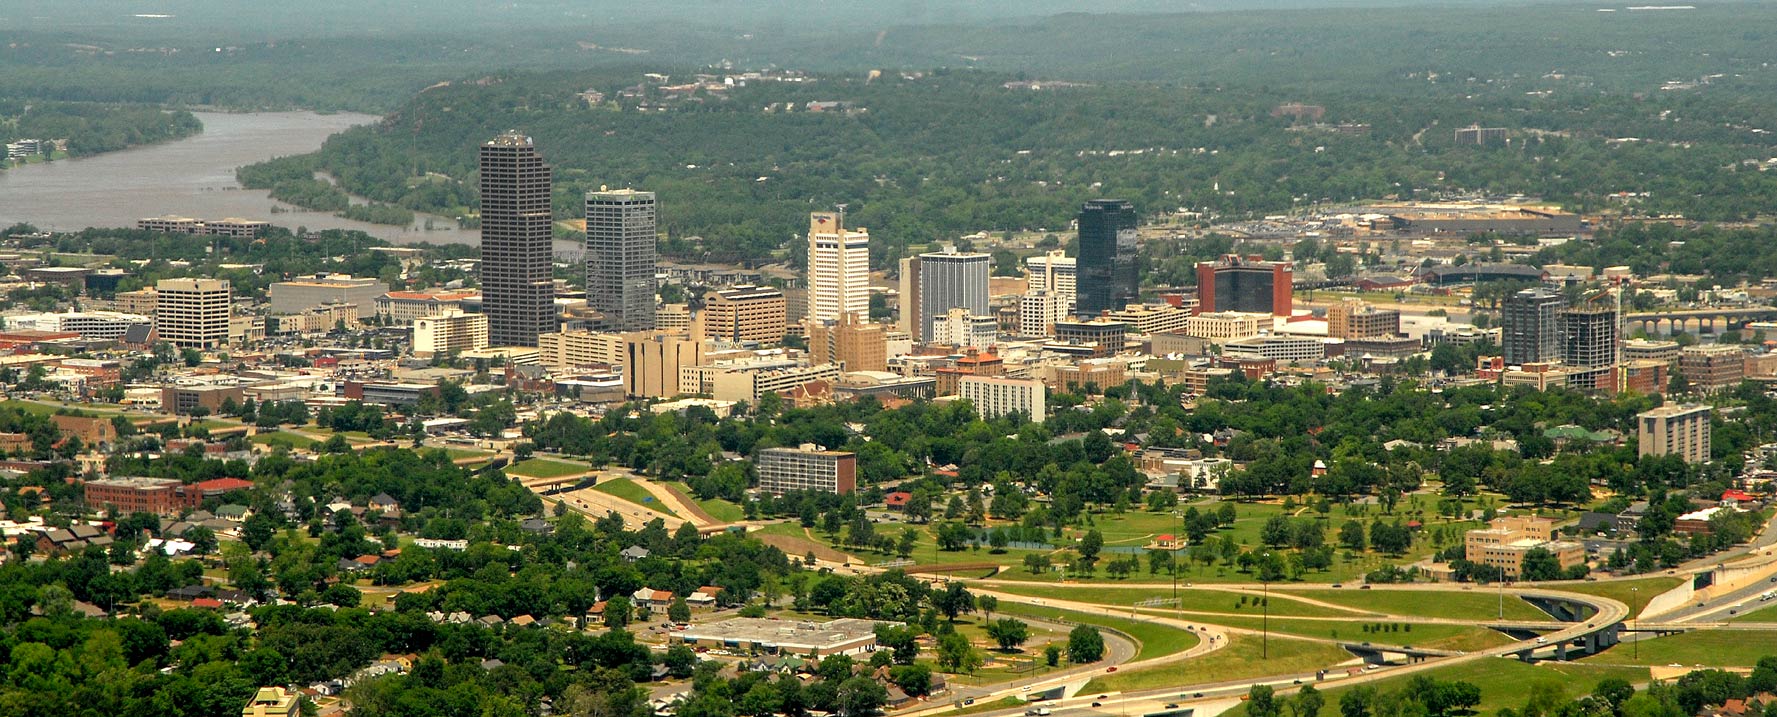 Aerial view of Downtown Little Rock